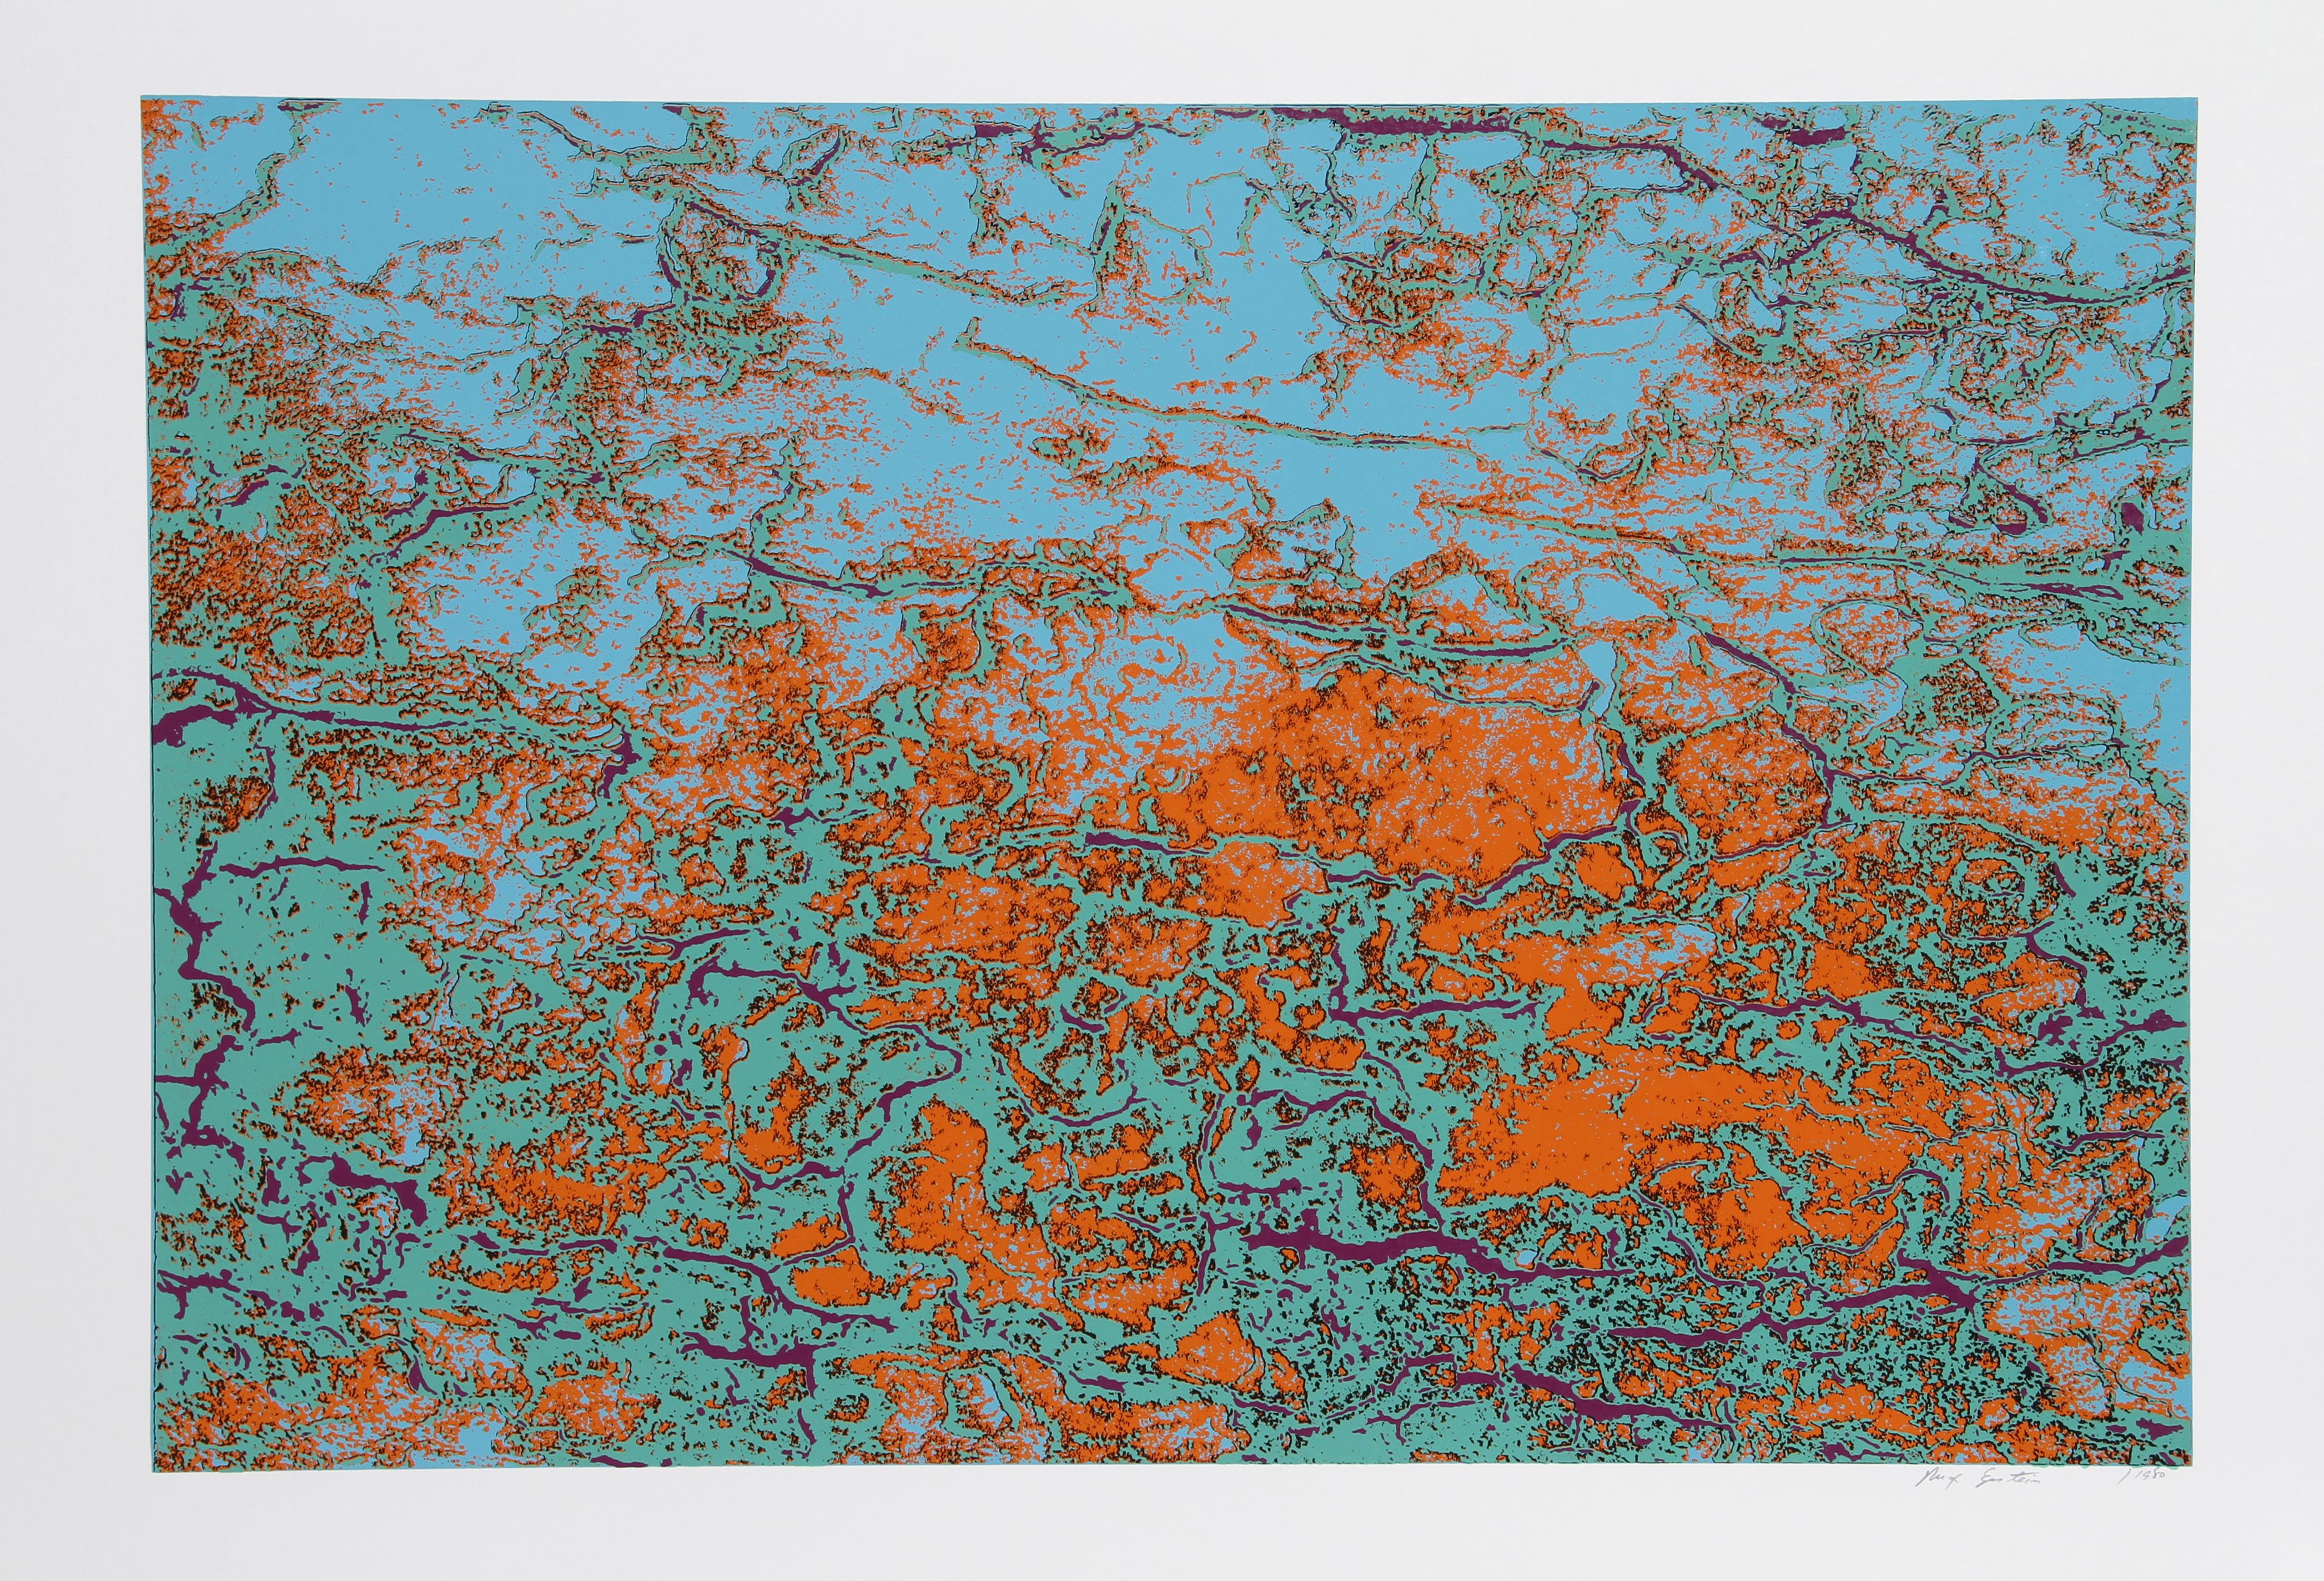 Coral Gem
Max Epstein, Canadian (1932–2002)
Date: 1980
Screenprint, signed in pencil
Edition of 99, AP
Image Size: 19 x 28 inches
Size: 23 in. x 35 in. (58.42 cm x 88.9 cm)